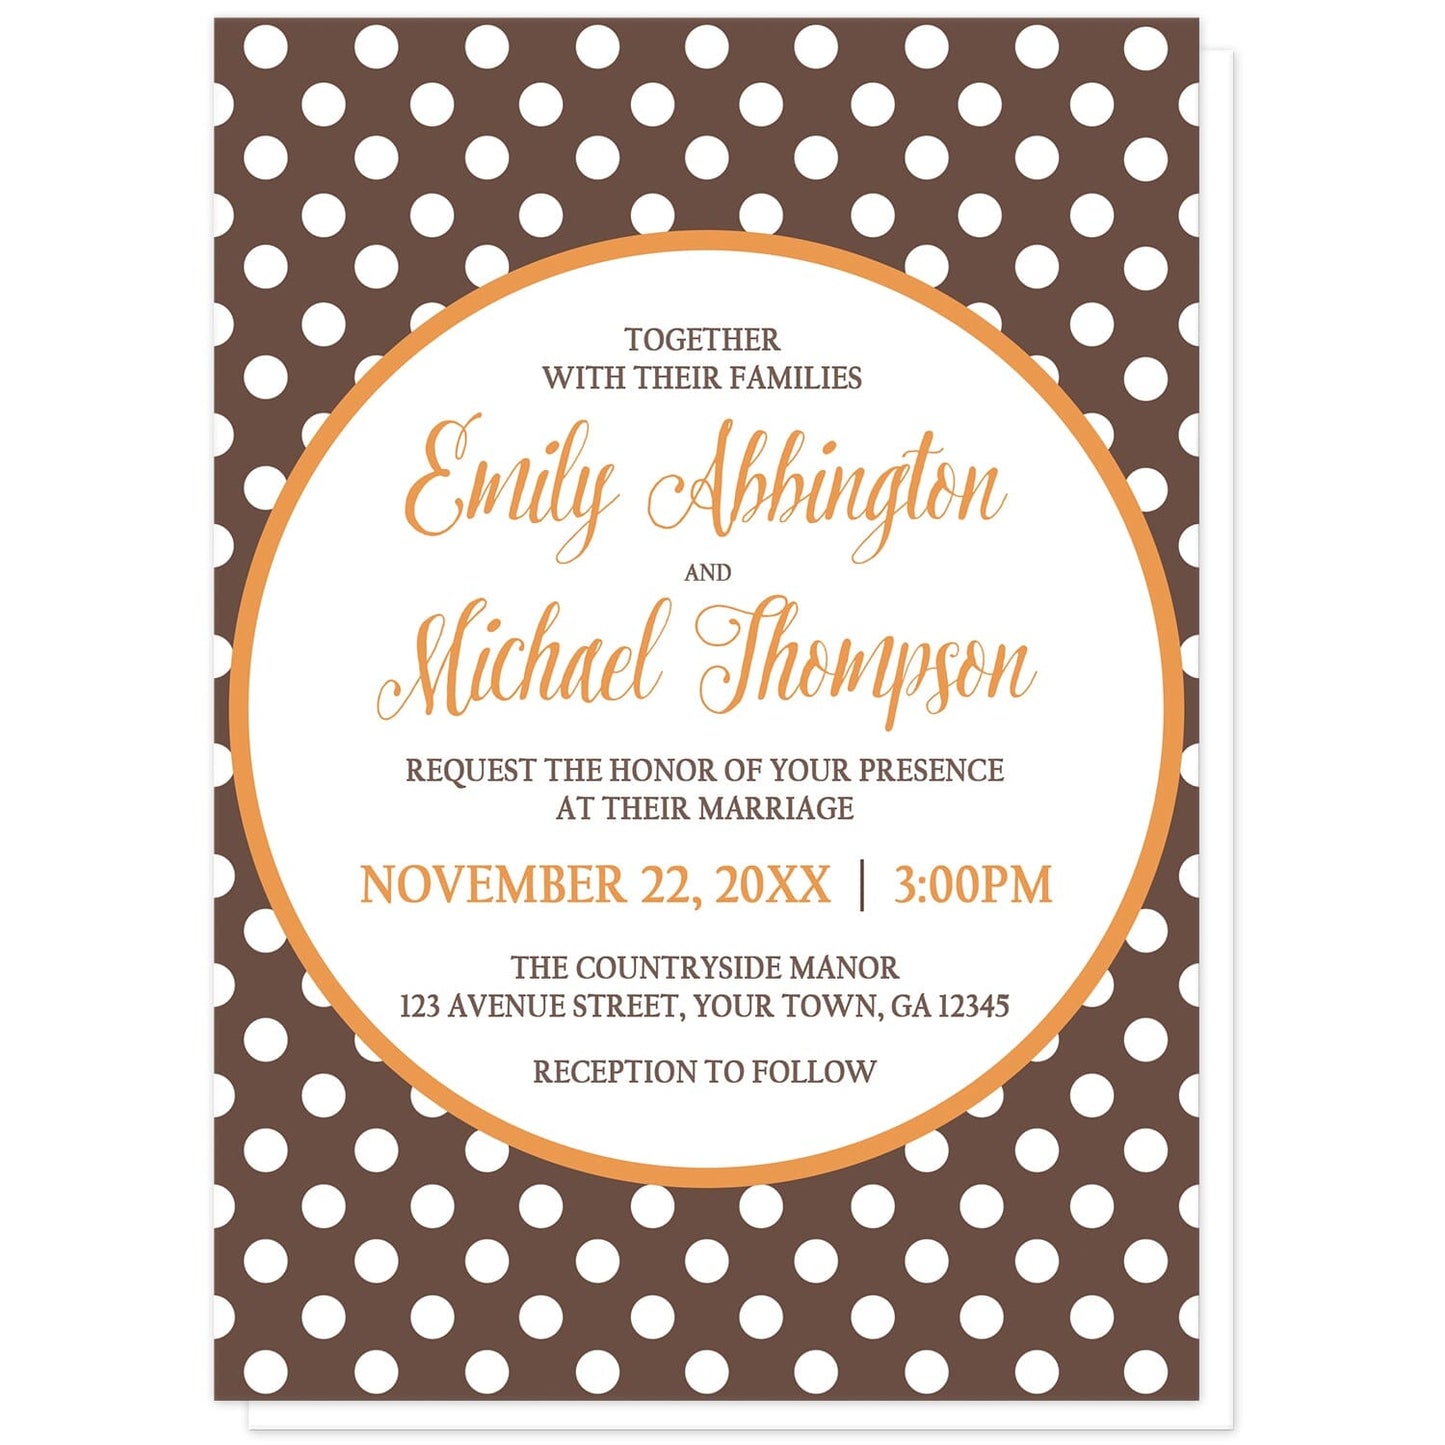 Orange Brown Polka Dot Wedding Invitations at Artistically Invited. Autumn-inspired orange brown polka dot wedding invitations with your marriage celebration details custom printed in orange and brown inside a white circle outlined in orange, over a brown polka dot pattern. The couple's names and wedding date are printed in orange while the remaining details are printed in brown.